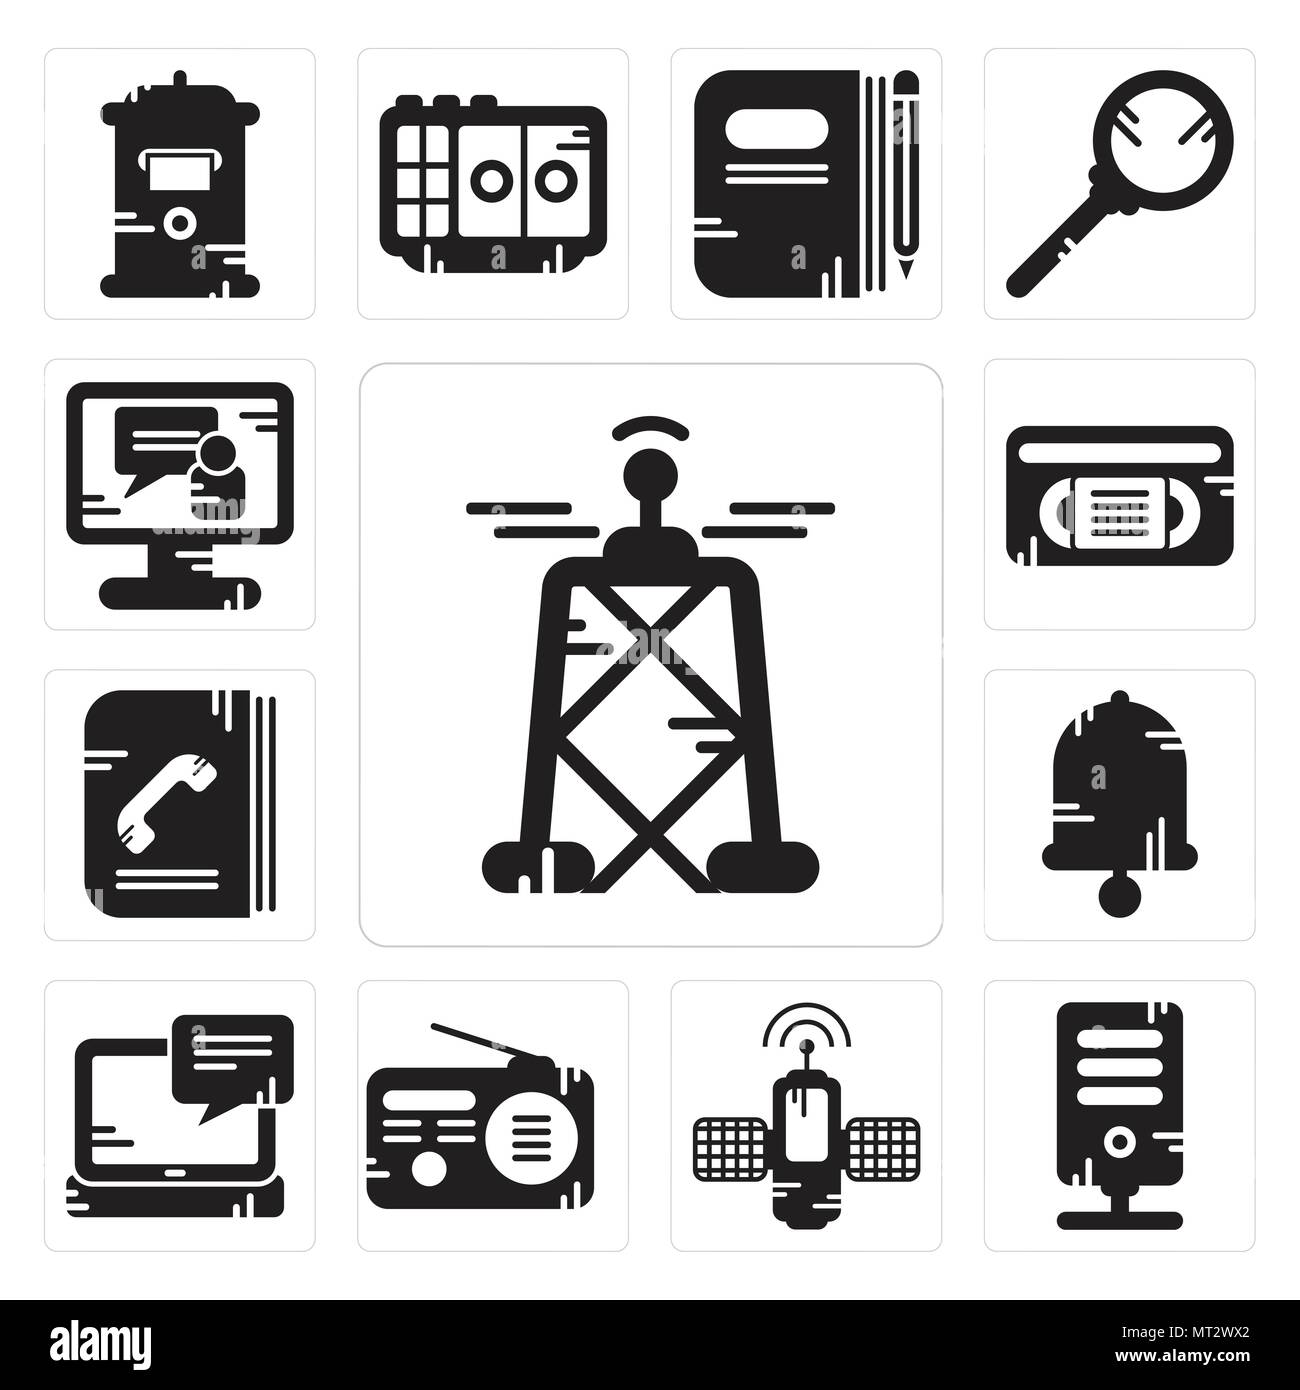 Set Of 13 simple editable icons such as Antenna, Server, Satellite, Radio, Laptop, Bell, Phone book, Vhs, Video call can be used for mobile, web UI Stock Vector